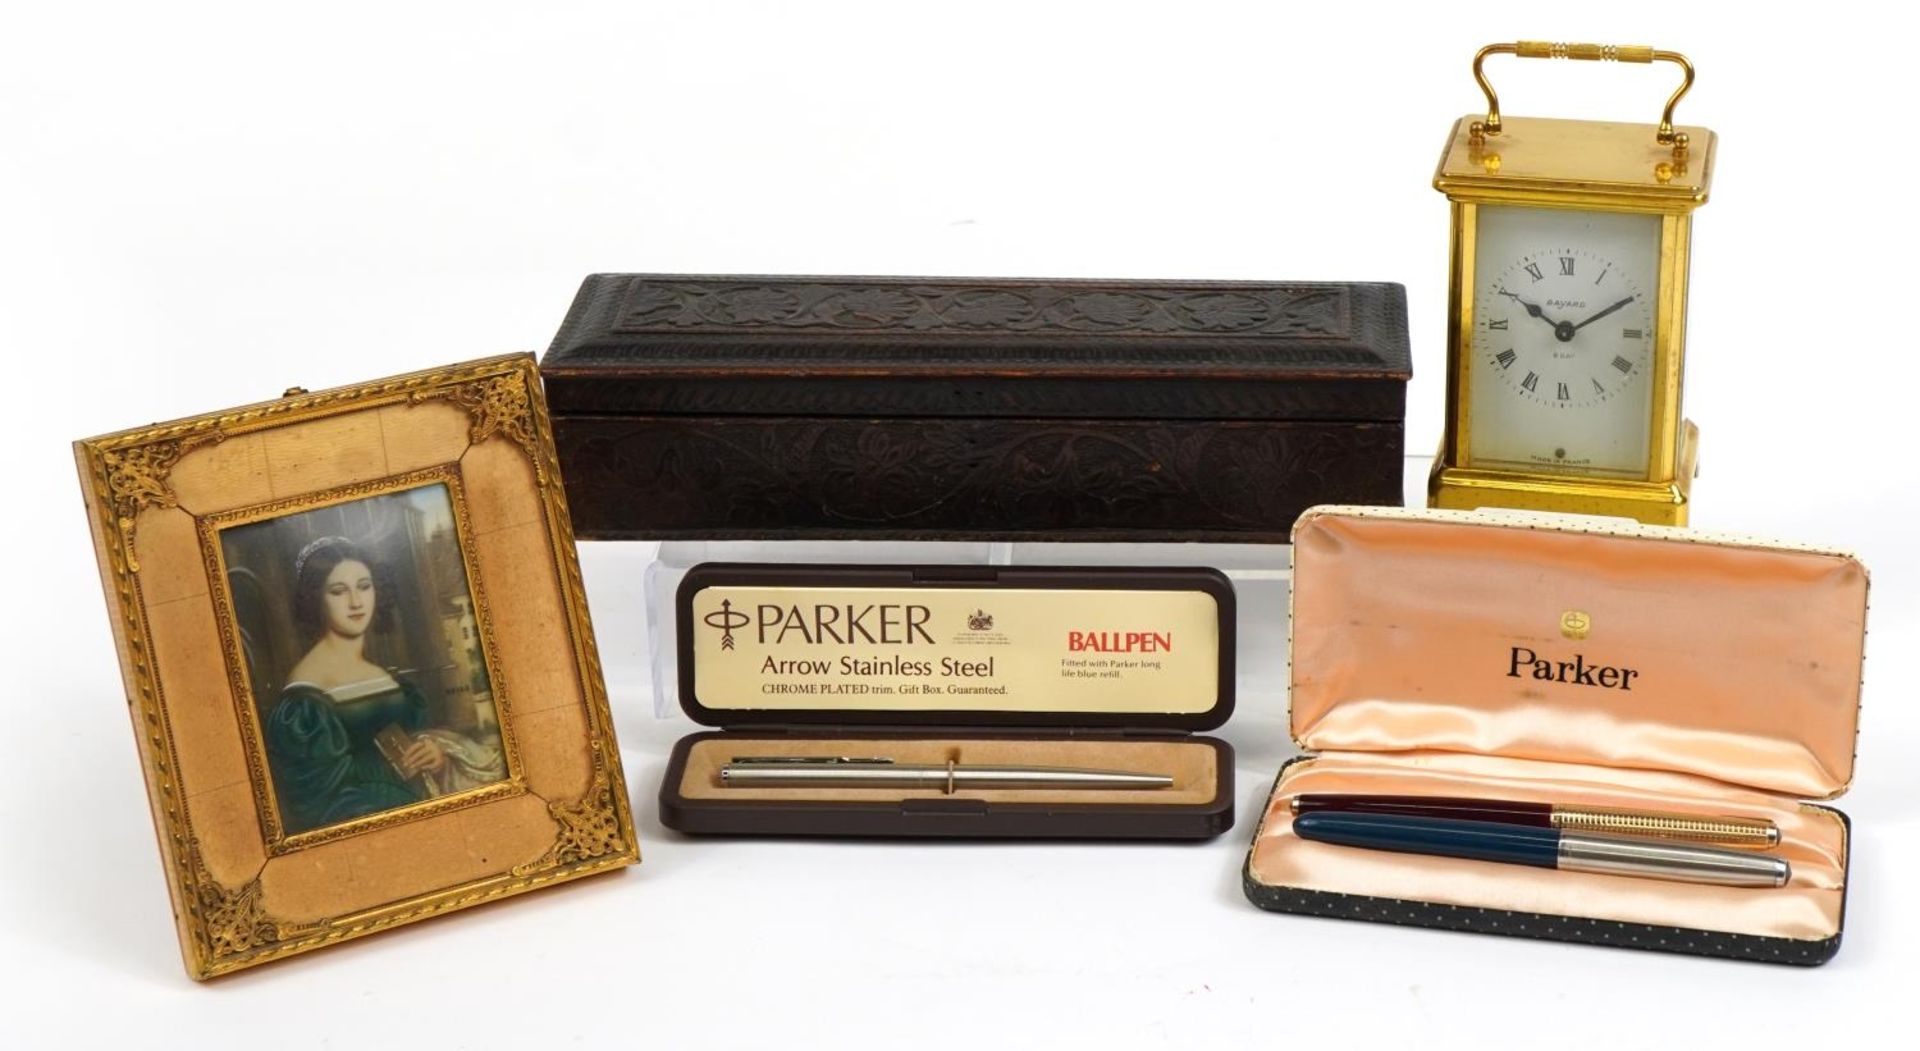 Sundry items including a Bayard eight day carriage clock, Parker 65 with gold nib, Parker 51 and